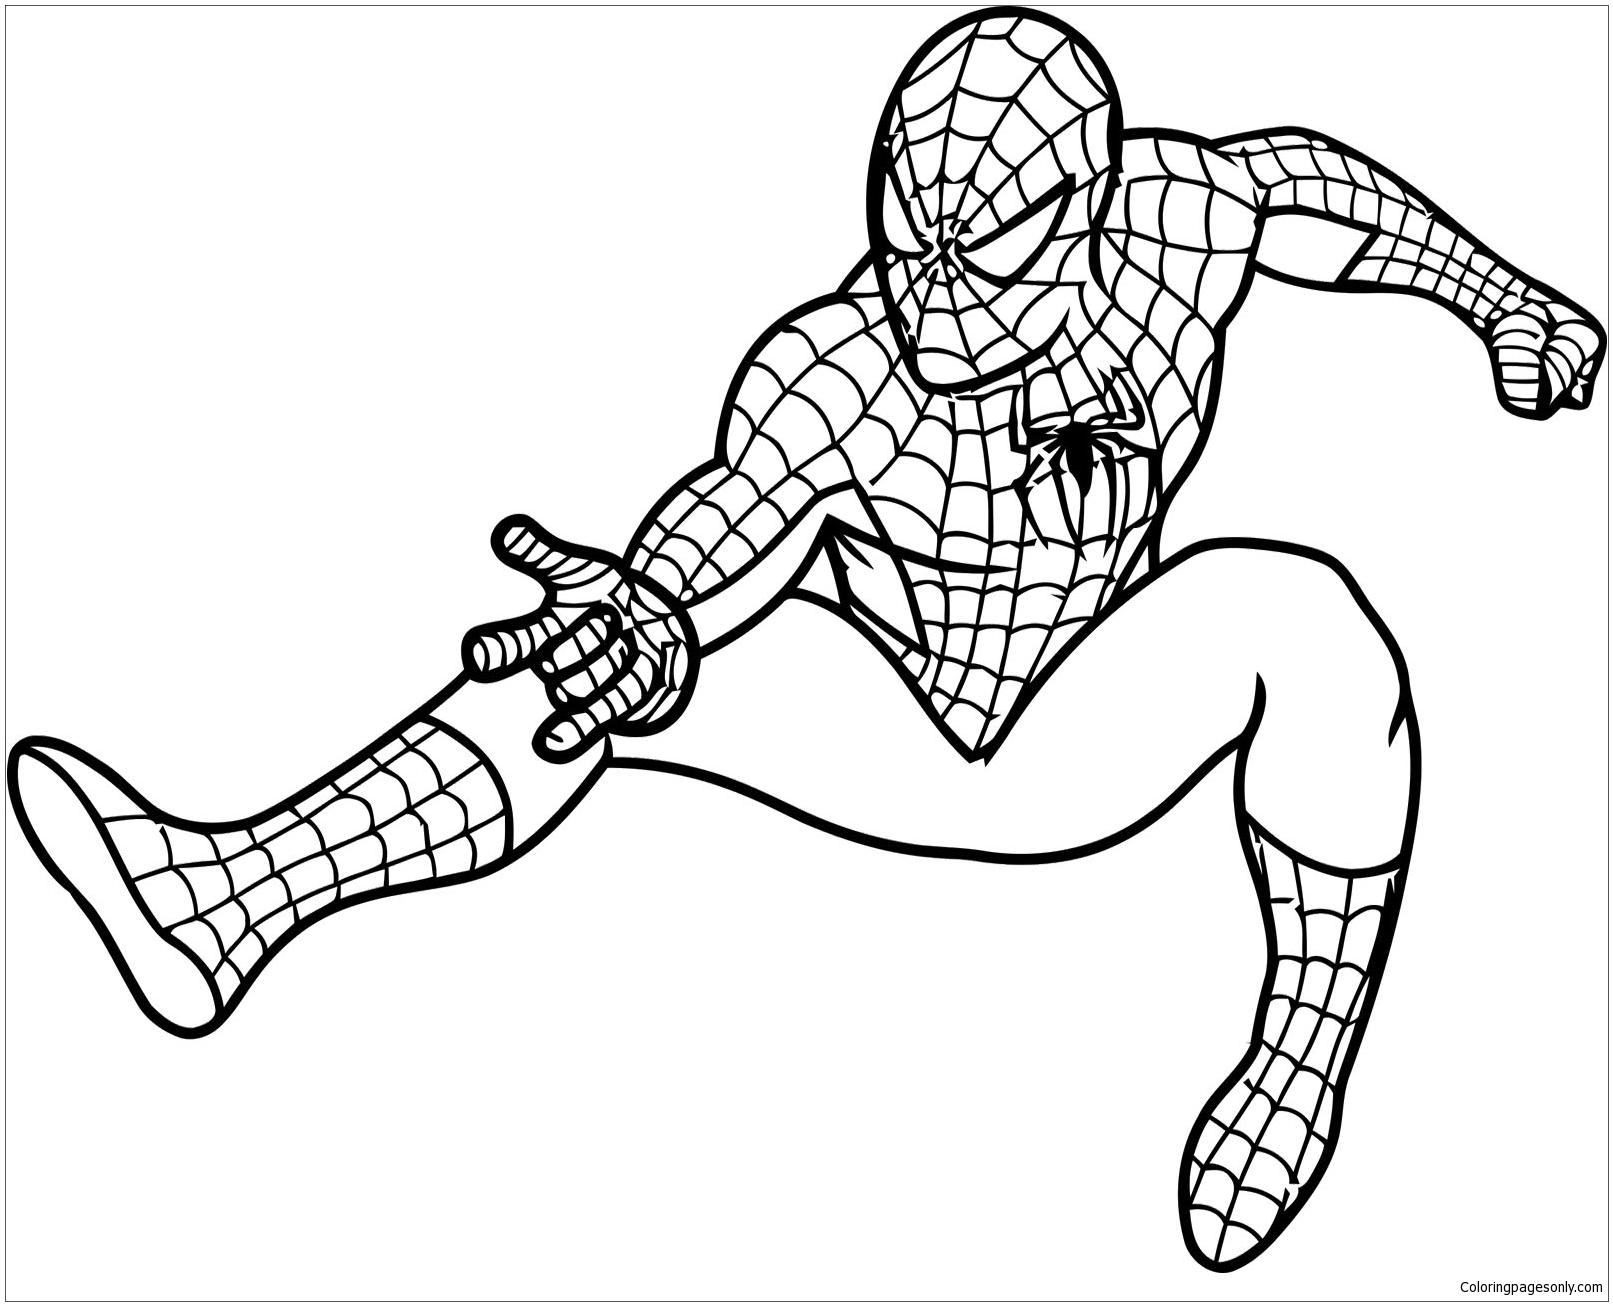 Epic Spider Man Coloring Pages   Coloring Pages   Coloring Pages ...